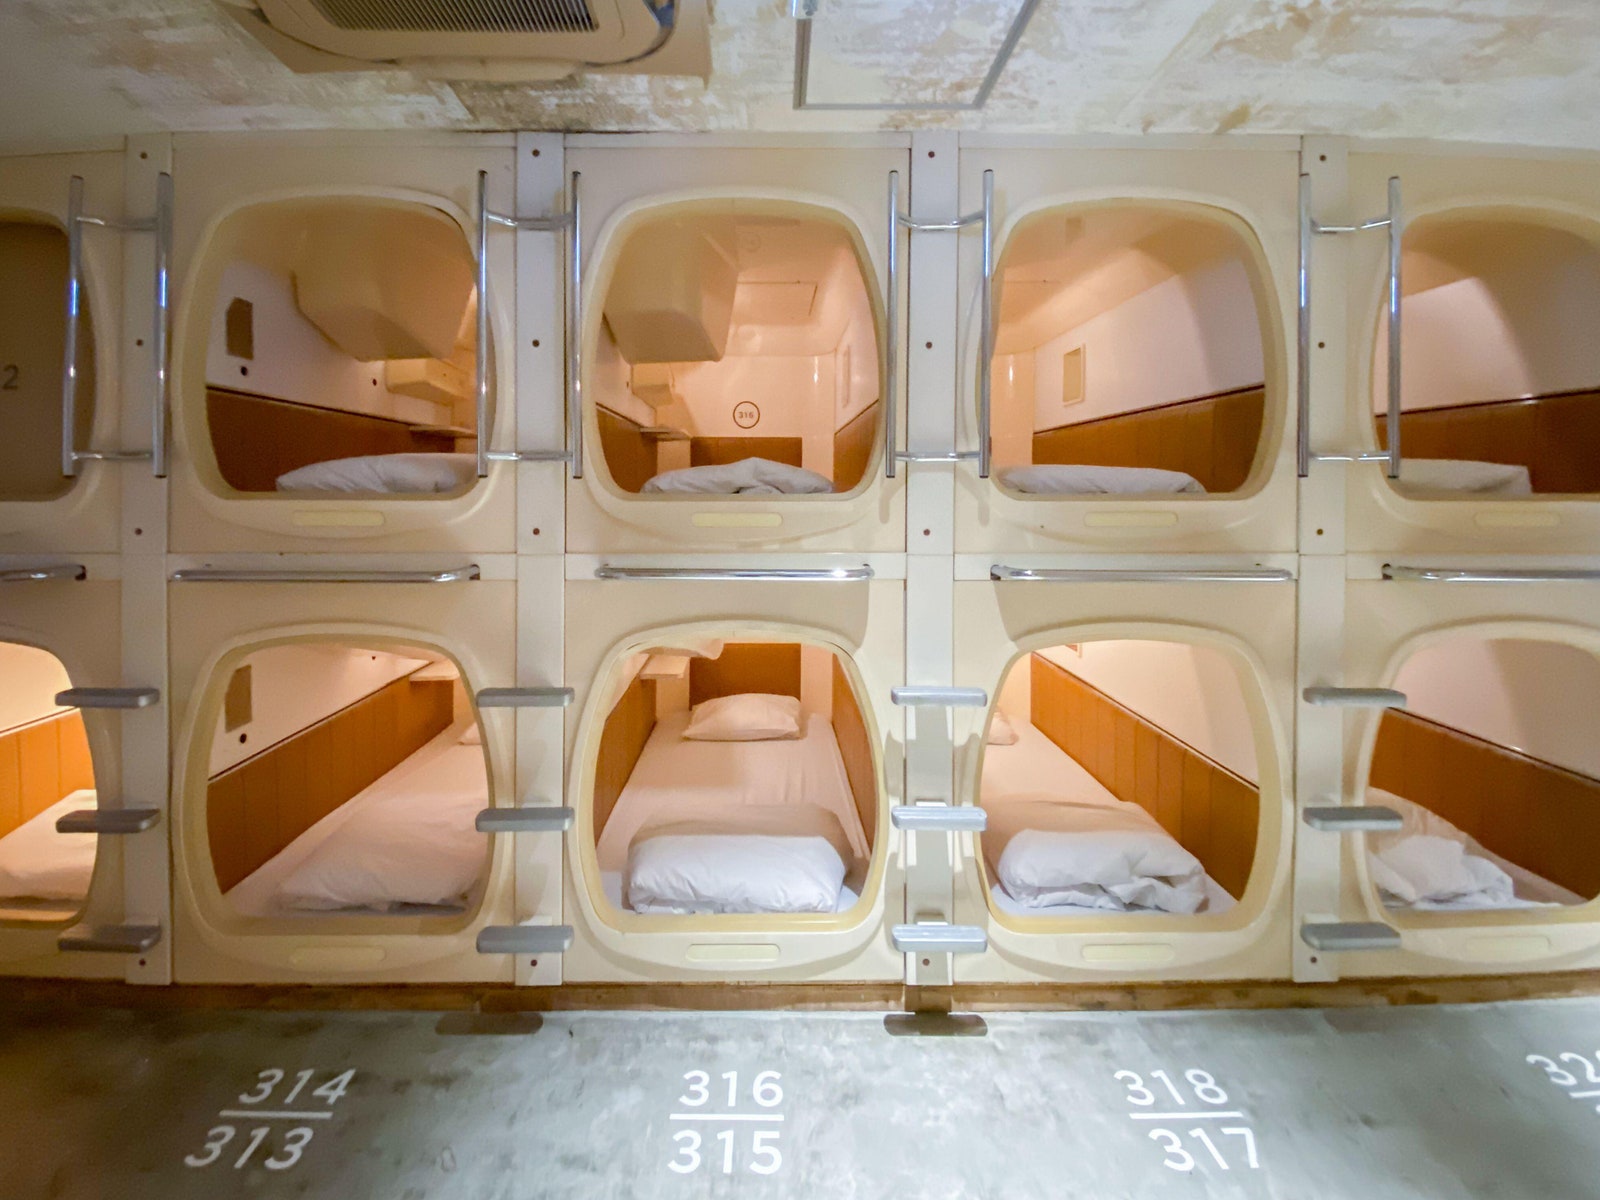 Inside the World’s 5 Smallest Hotel Rooms